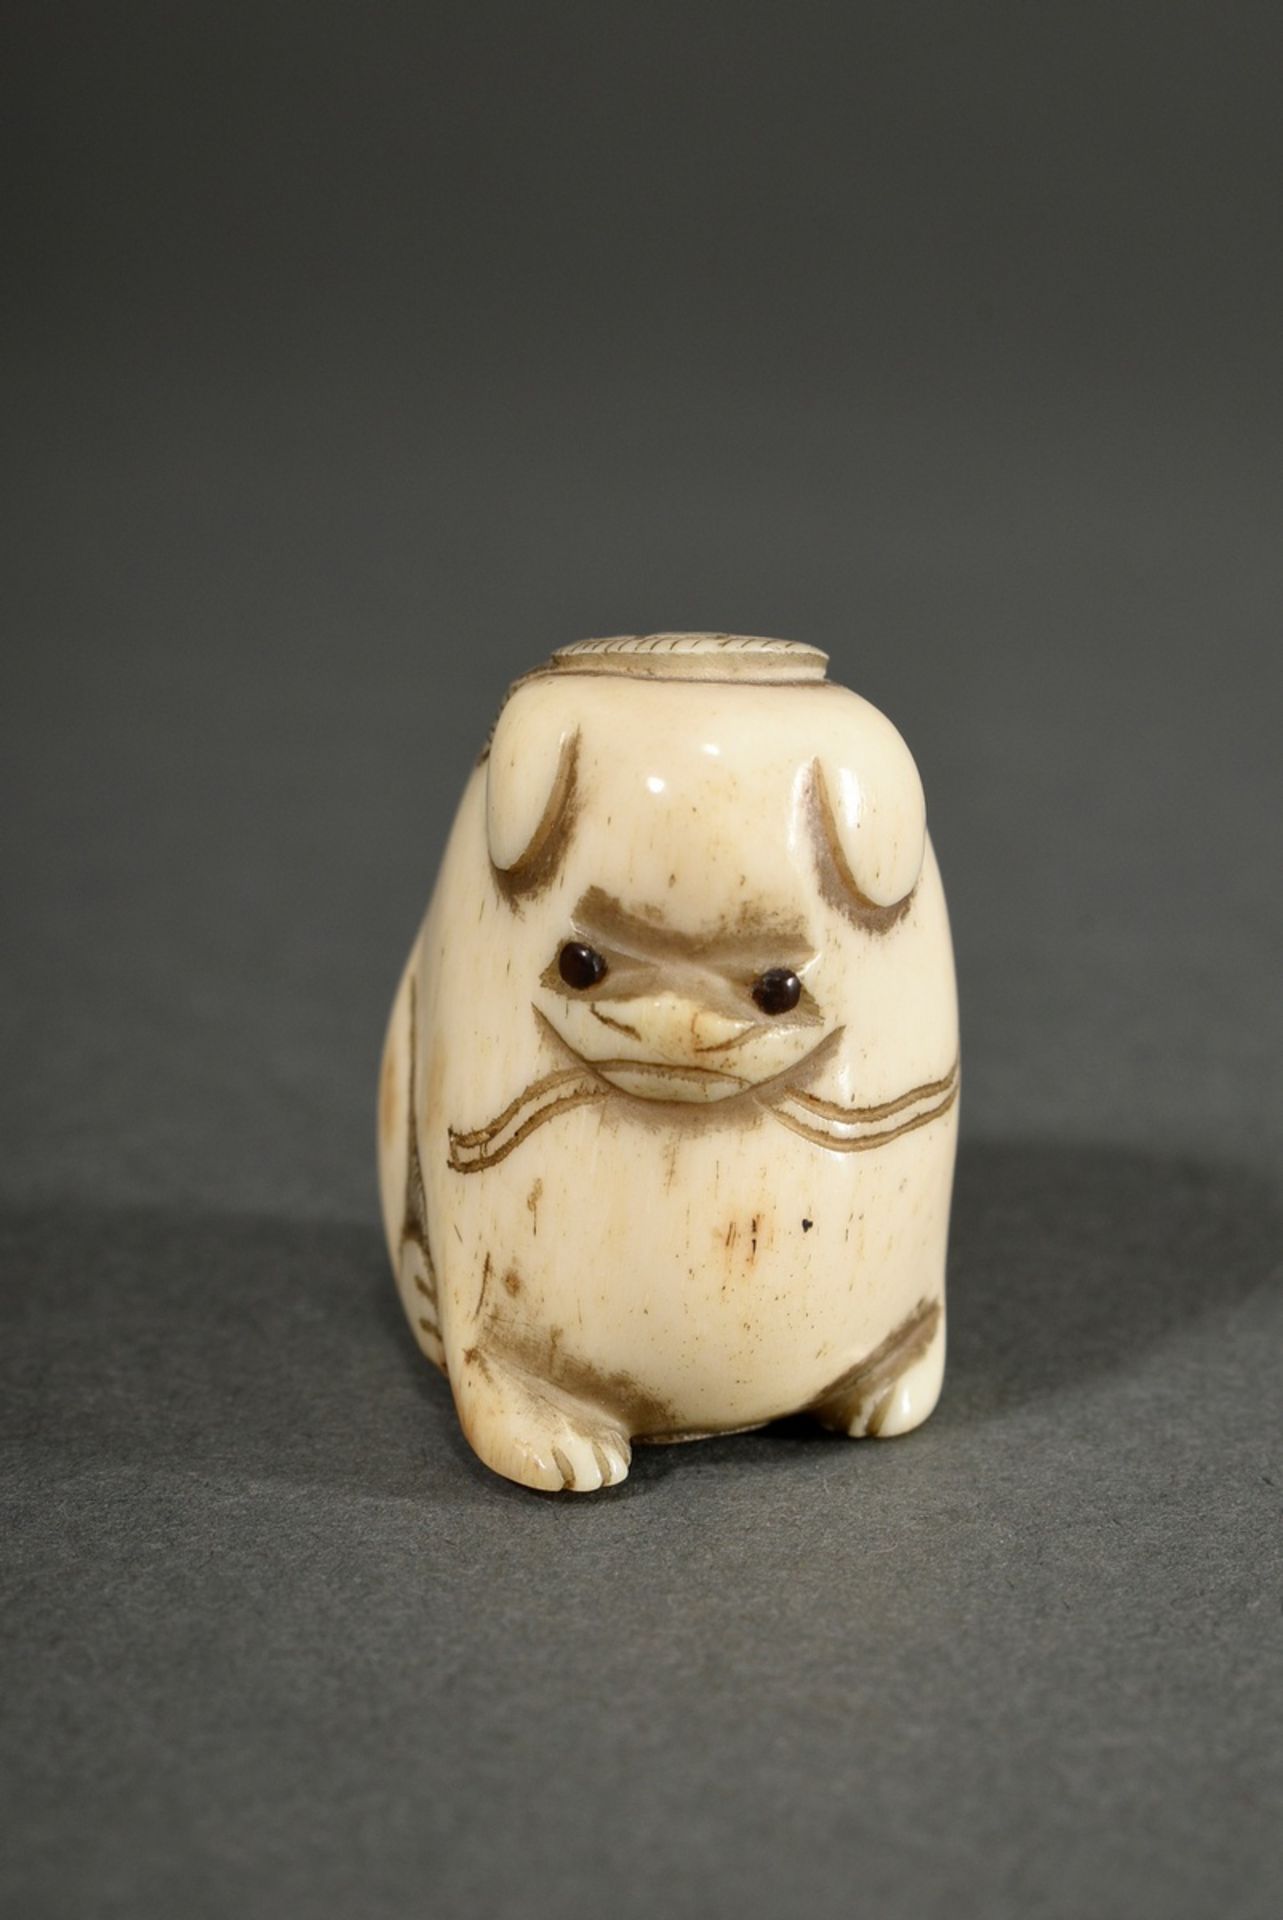 Stag horn netsuke "Sitting puppy" with inlaid horn eyes, Japan, h. 3.1cm - Image 2 of 5